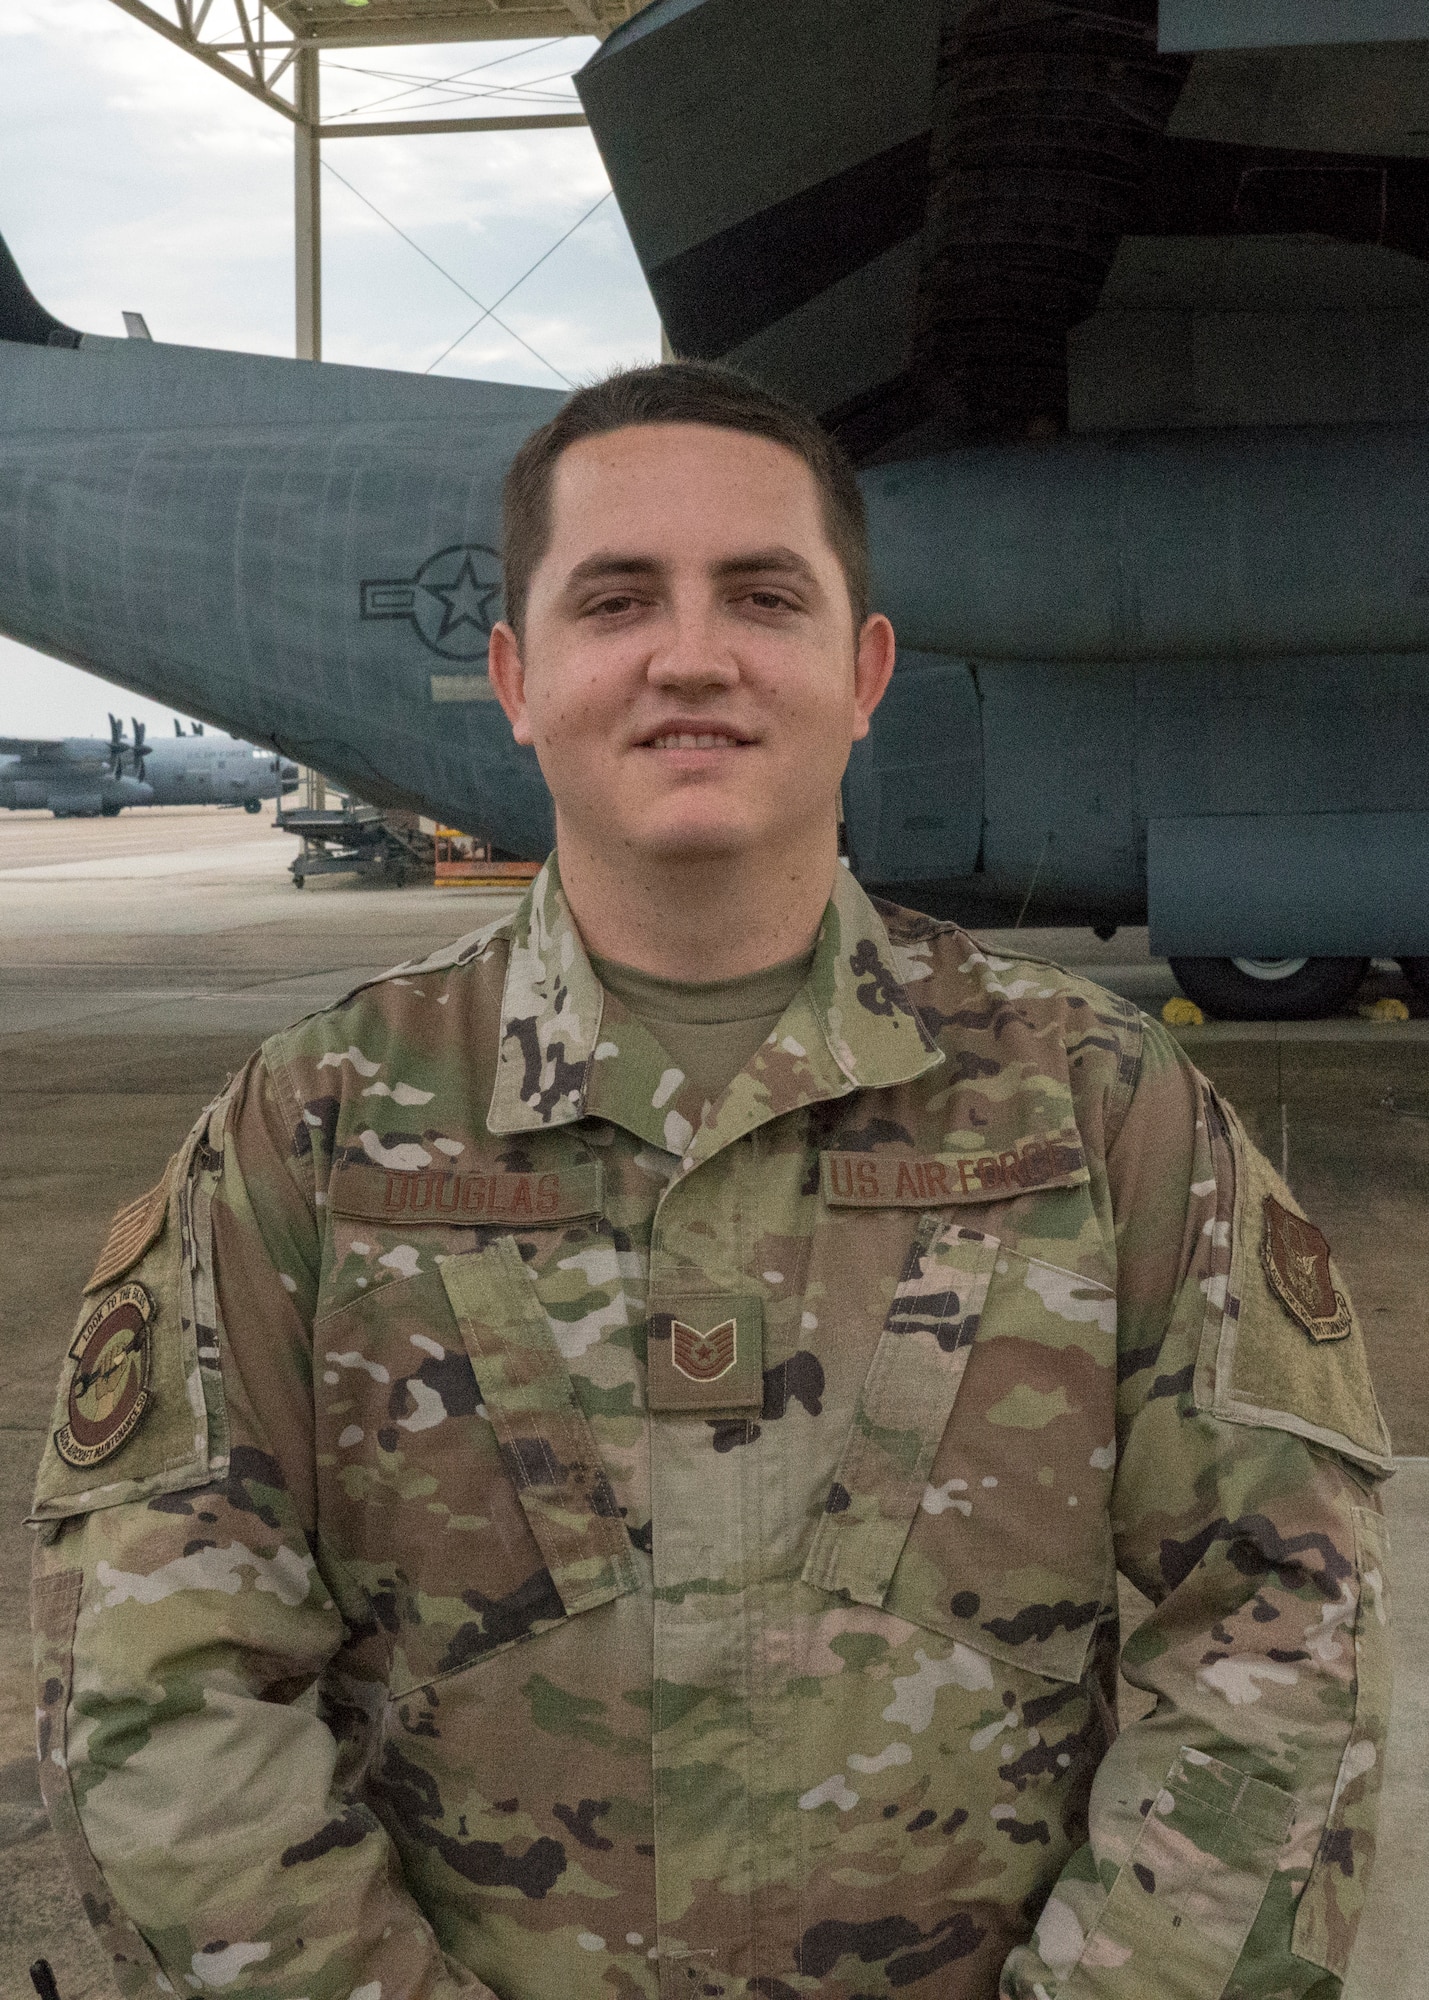 Tech. Sgt. John Douglas, 403rd Aircraft Maintenance Squadron aerospace propulsion technician, was selected as the 403rd Wing’s first quarter award winner in the noncommissioned officer category. (U.S. Air Force photo by Tech. Sgt. Christopher Carranza)